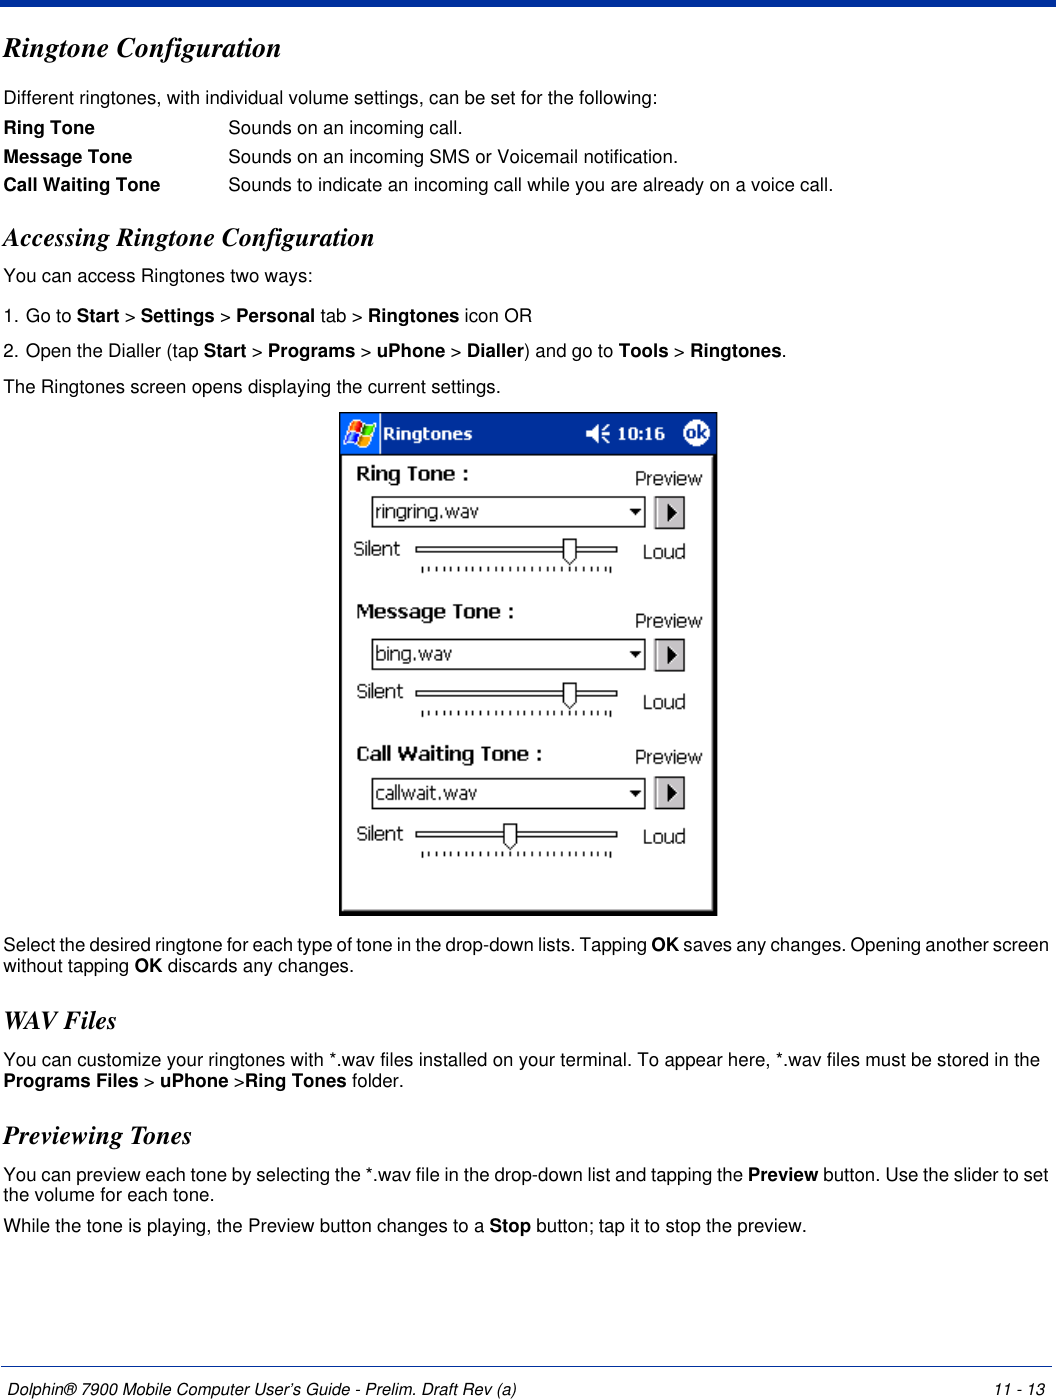 Dolphin® 7900 Mobile Computer User’s Guide - Prelim. Draft Rev (a) 11 - 13Ringtone ConfigurationDifferent ringtones, with individual volume settings, can be set for the following:Ring Tone Sounds on an incoming call.Message Tone Sounds on an incoming SMS or Voicemail notification.Call Waiting Tone Sounds to indicate an incoming call while you are already on a voice call.Accessing Ringtone ConfigurationYou can access Ringtones two ways:1. Go to Start &gt; Settings &gt; Personal tab &gt; Ringtones icon OR2. Open the Dialler (tap Start &gt; Programs &gt; uPhone &gt; Dialler) and go to Tools &gt; Ringtones.The Ringtones screen opens displaying the current settings. Select the desired ringtone for each type of tone in the drop-down lists. Tapping OK saves any changes. Opening another screen without tapping OK discards any changes.WAV FilesYou can customize your ringtones with *.wav files installed on your terminal. To appear here, *.wav files must be stored in the Programs Files &gt; uPhone &gt;Ring Tones folder.Previewing TonesYou can preview each tone by selecting the *.wav file in the drop-down list and tapping the Preview button. Use the slider to set the volume for each tone.While the tone is playing, the Preview button changes to a Stop button; tap it to stop the preview.